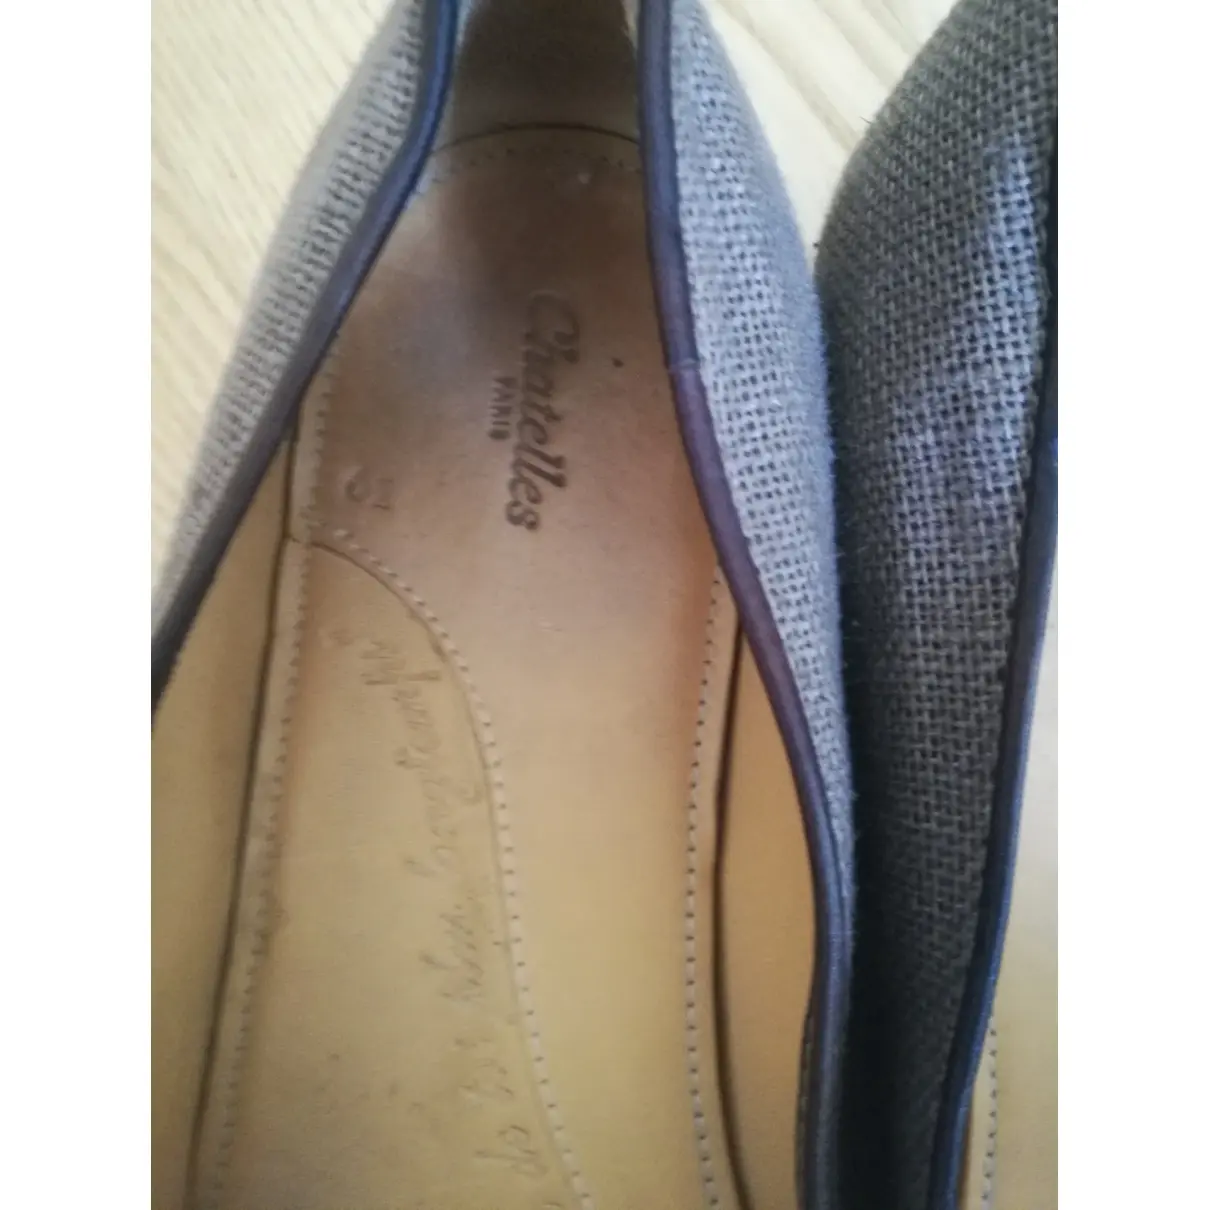 Leather flats Chatelles